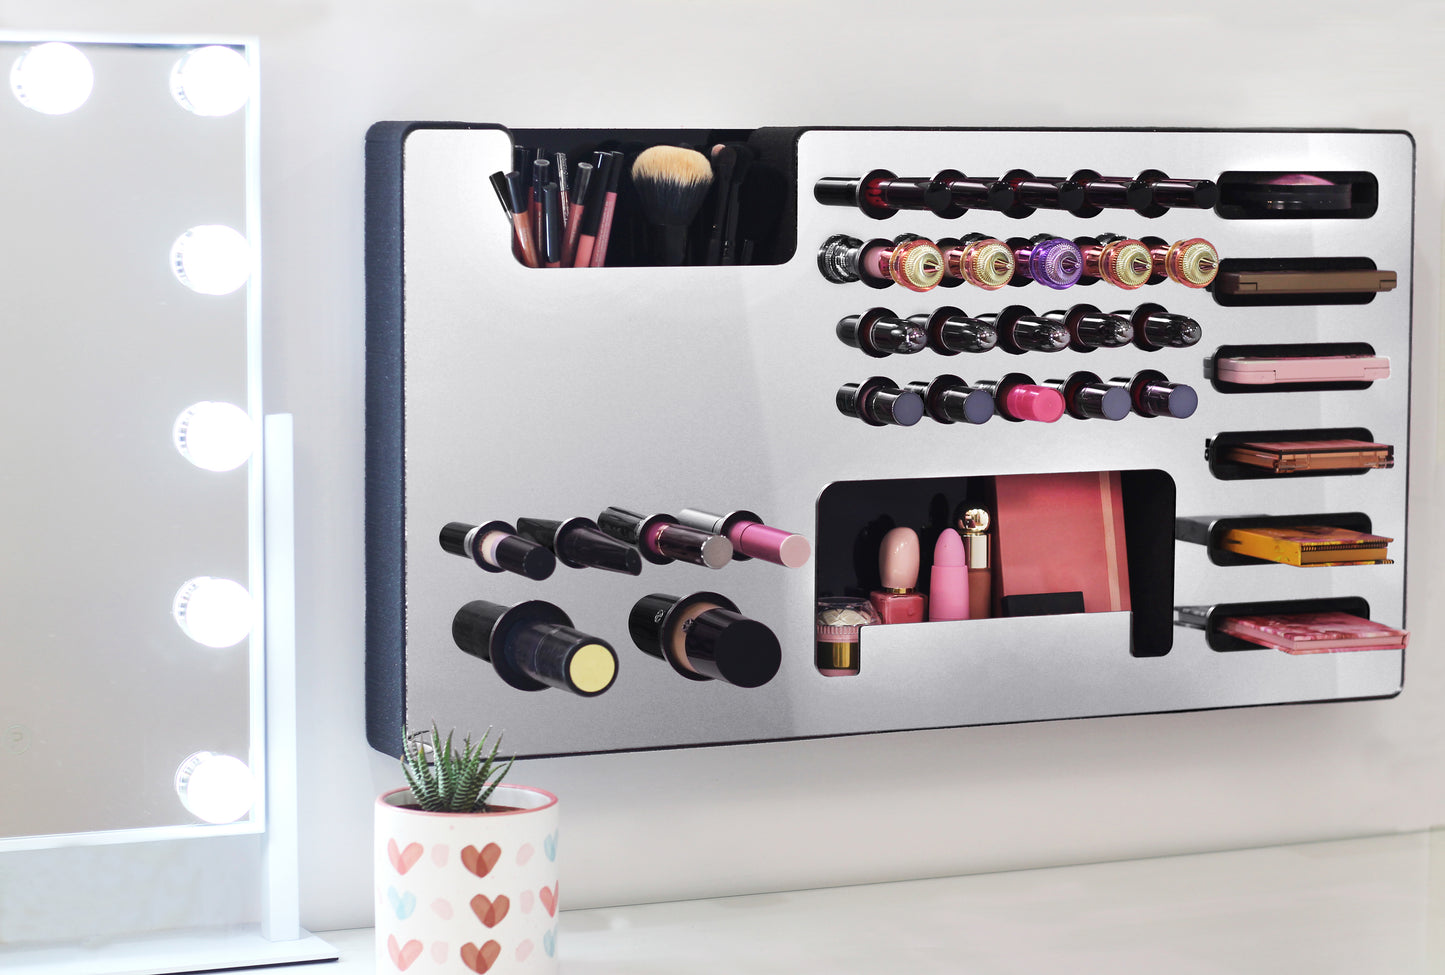 Mirror Silver Ultra Complete Makeup Solution Organizer shown mounted on the wall holding lipsticks, lip glosses, nail polishes, brushes, sunglasses and more by keeping items accessible and off of the counter. Shown next to a makeup vanity with samples of suggested items the organizer can hold. Tilted to the right to show the wall mounted makeup organizer at a different angle while still on the wall.